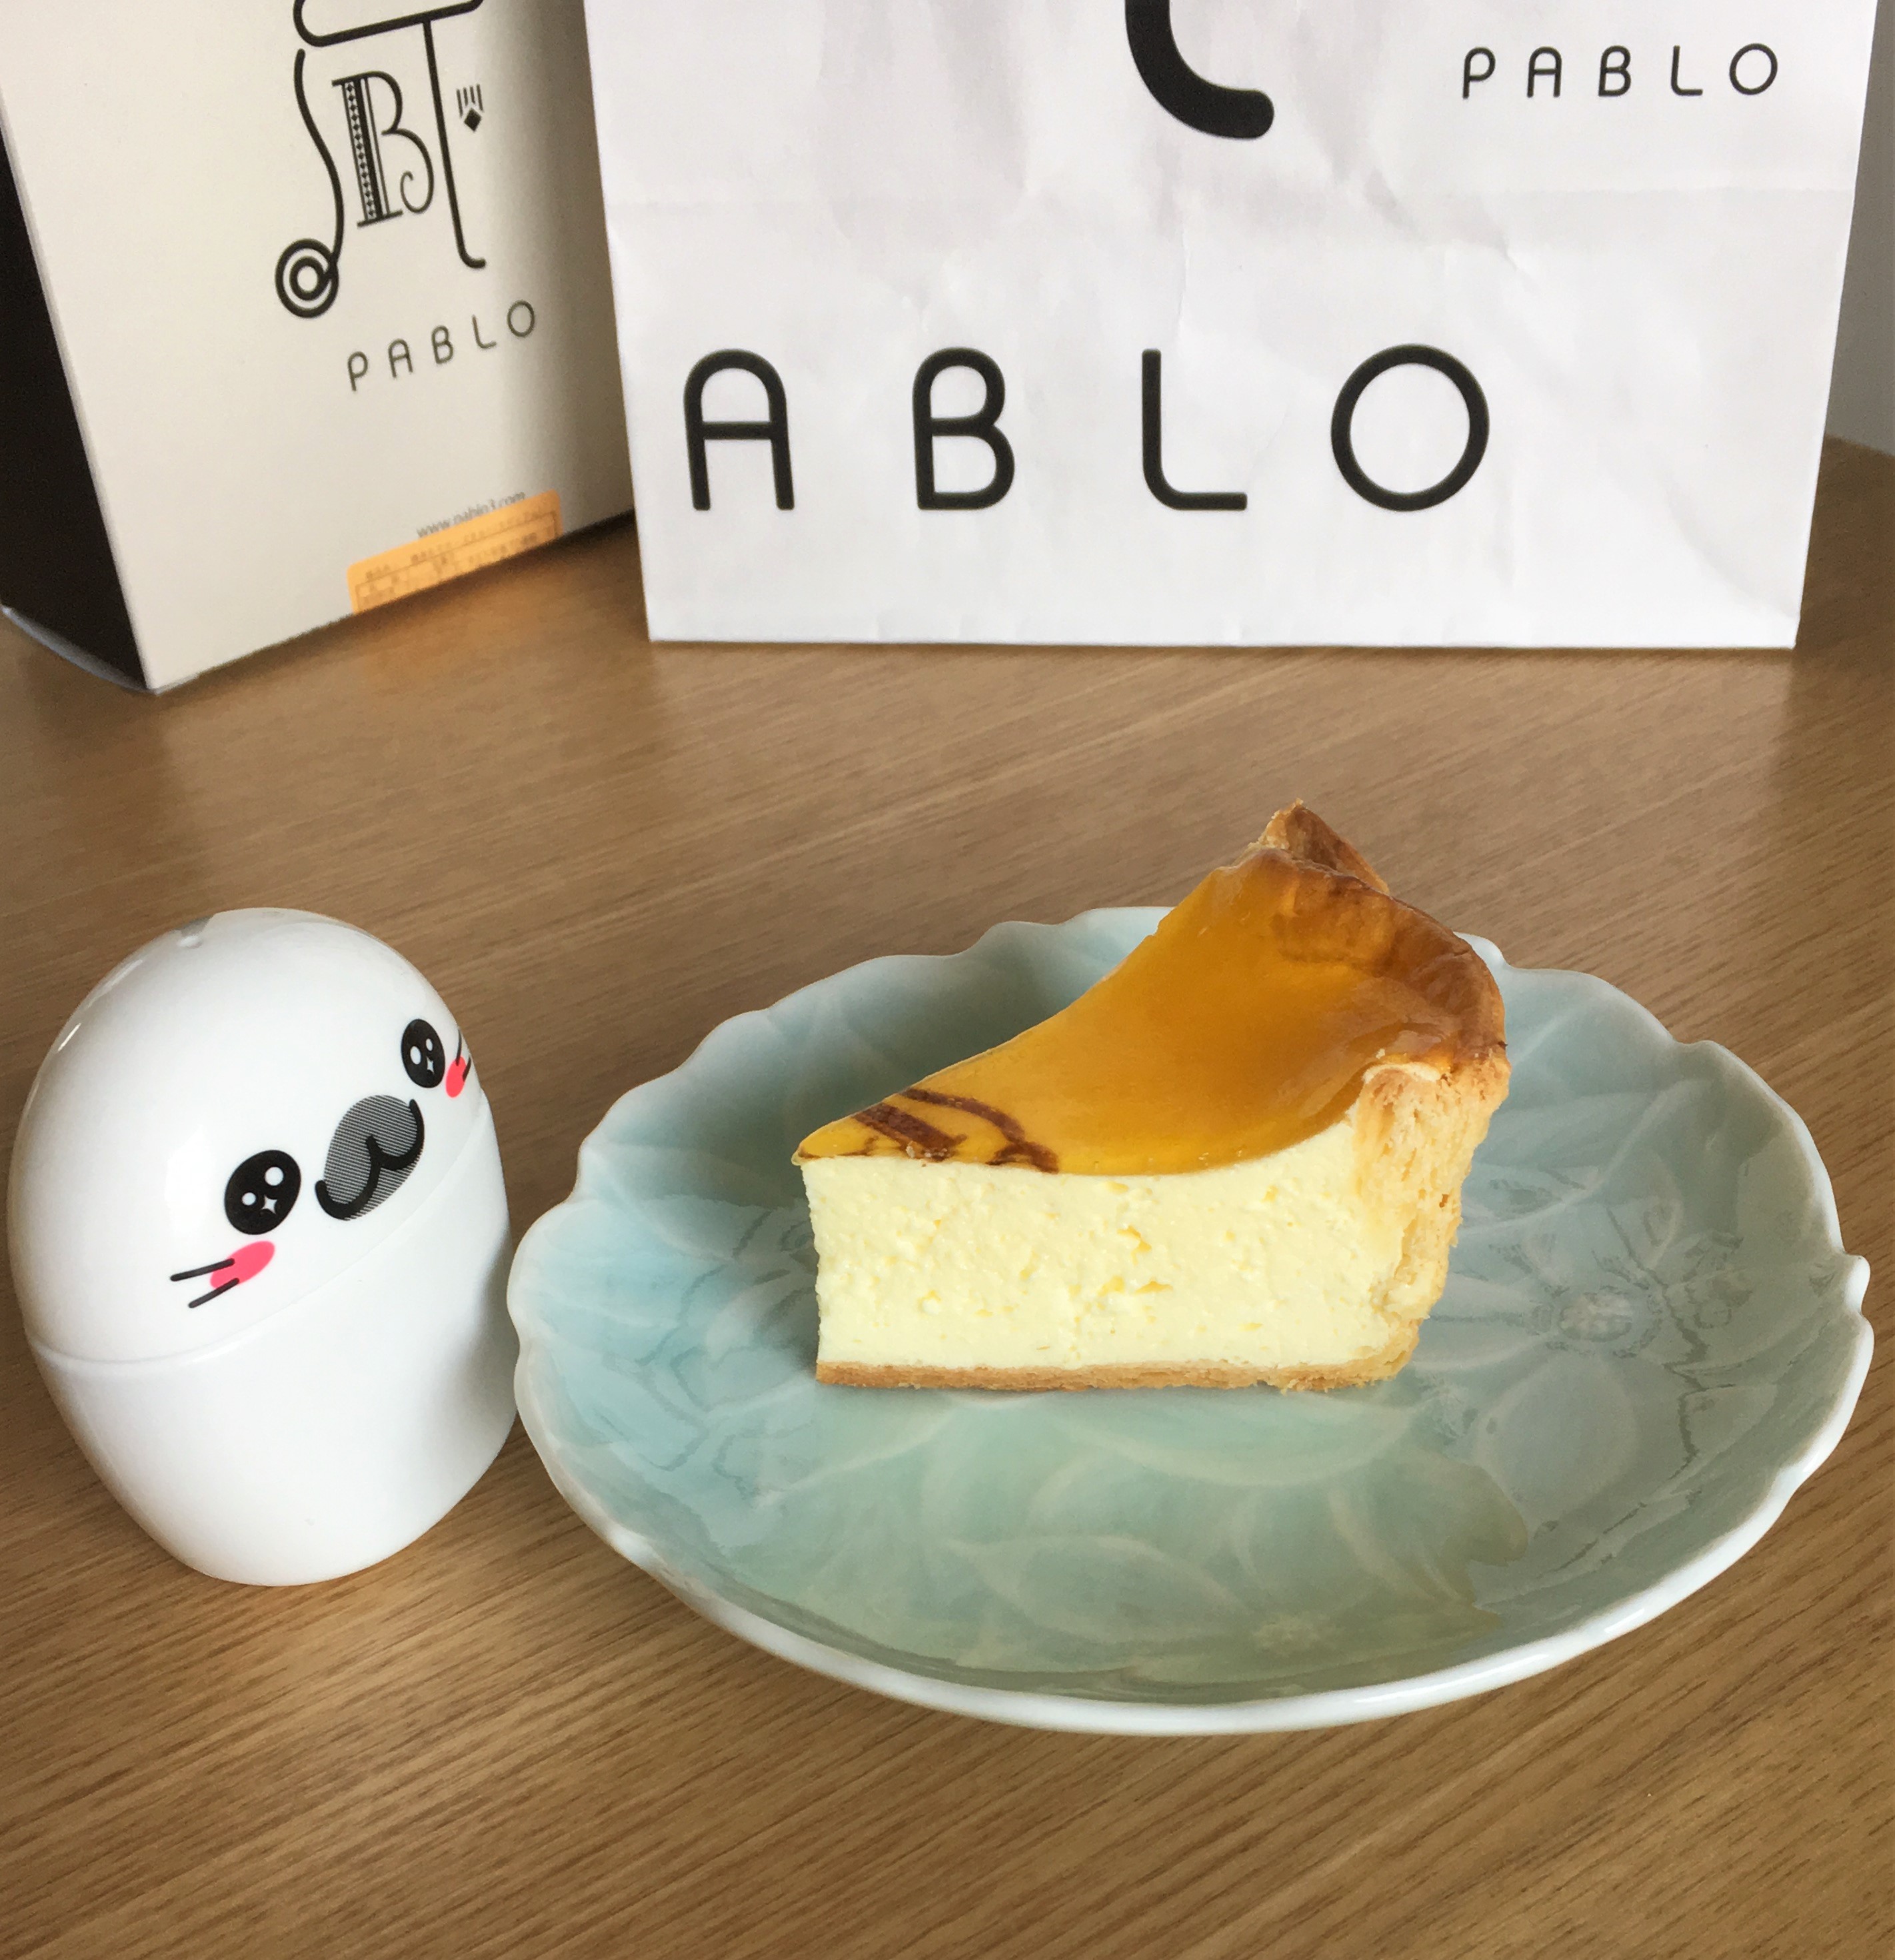 slice of Pablo cheesecake on a blue plate and pablo bags in background